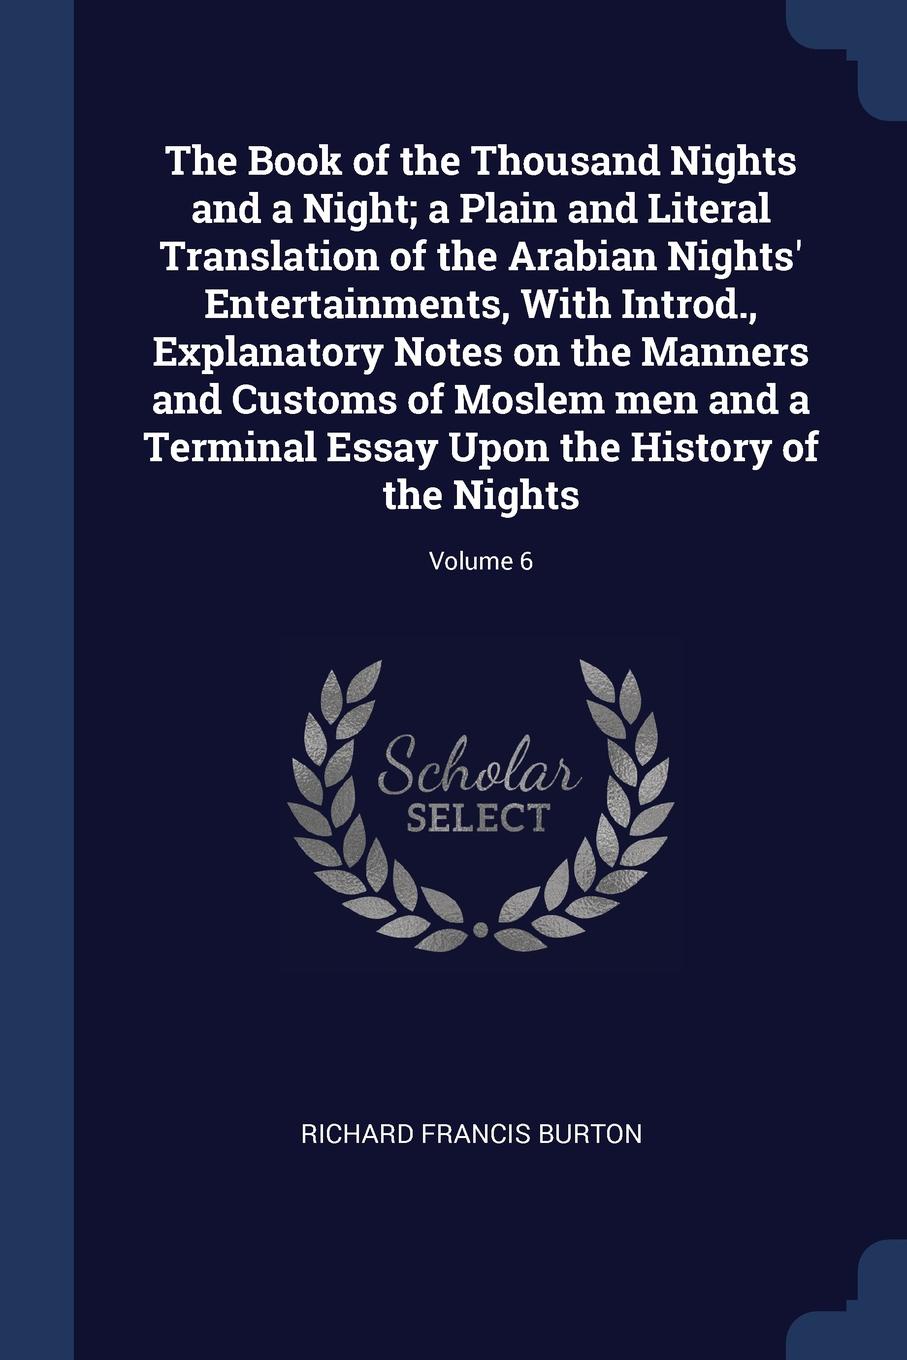 The Book of the Thousand Nights and a Night; a Plain and Literal Translation of the Arabian Nights. Entertainments, With Introd., Explanatory Notes on the Manners and Customs of Moslem men and a Terminal Essay Upon the History of the Nights; Volume 6